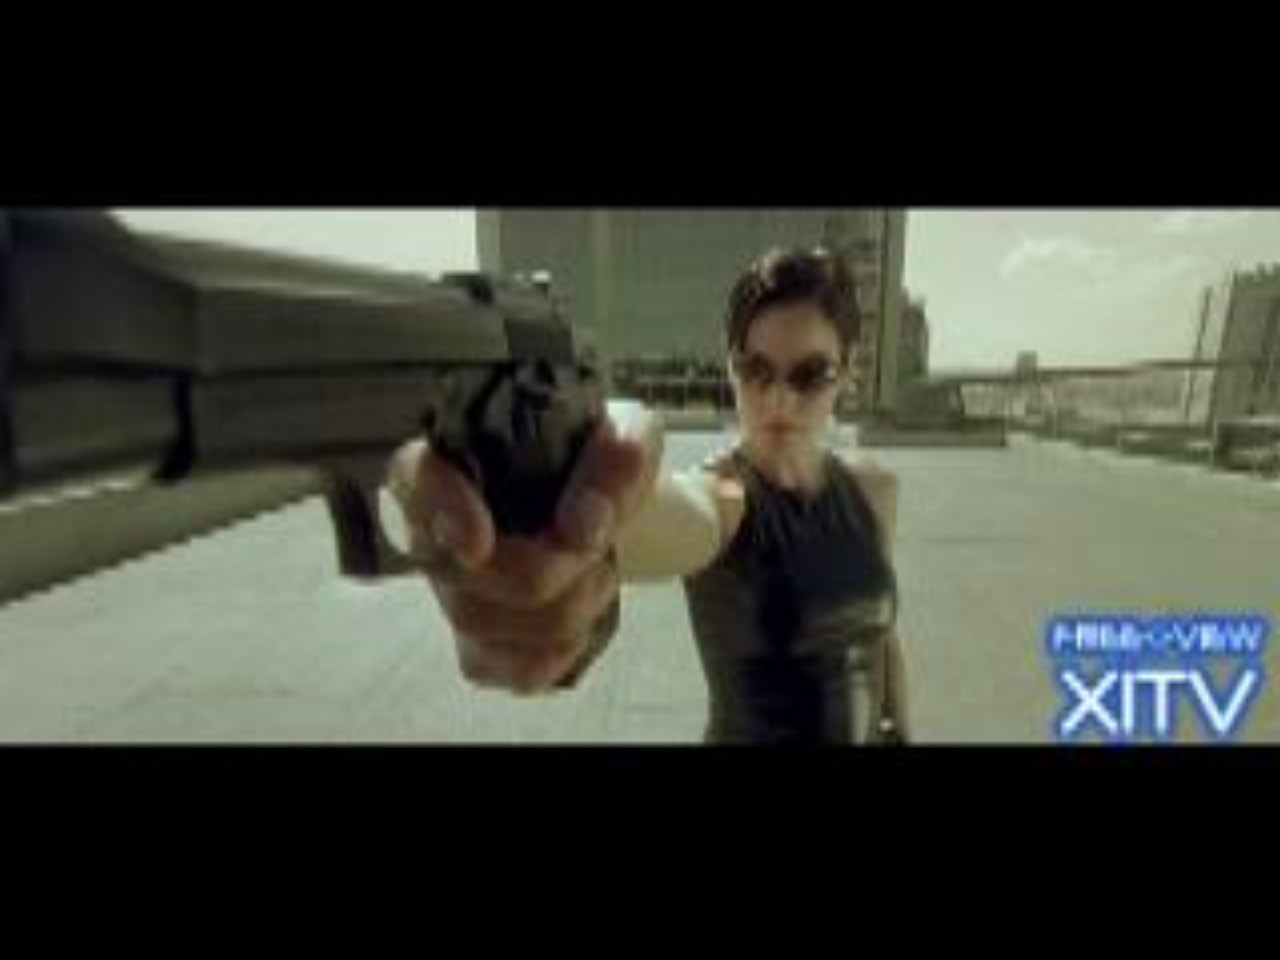 Watch Now! XITV FREE <> VIEW™ THE MATRIX! XITV Is Must See TV! 